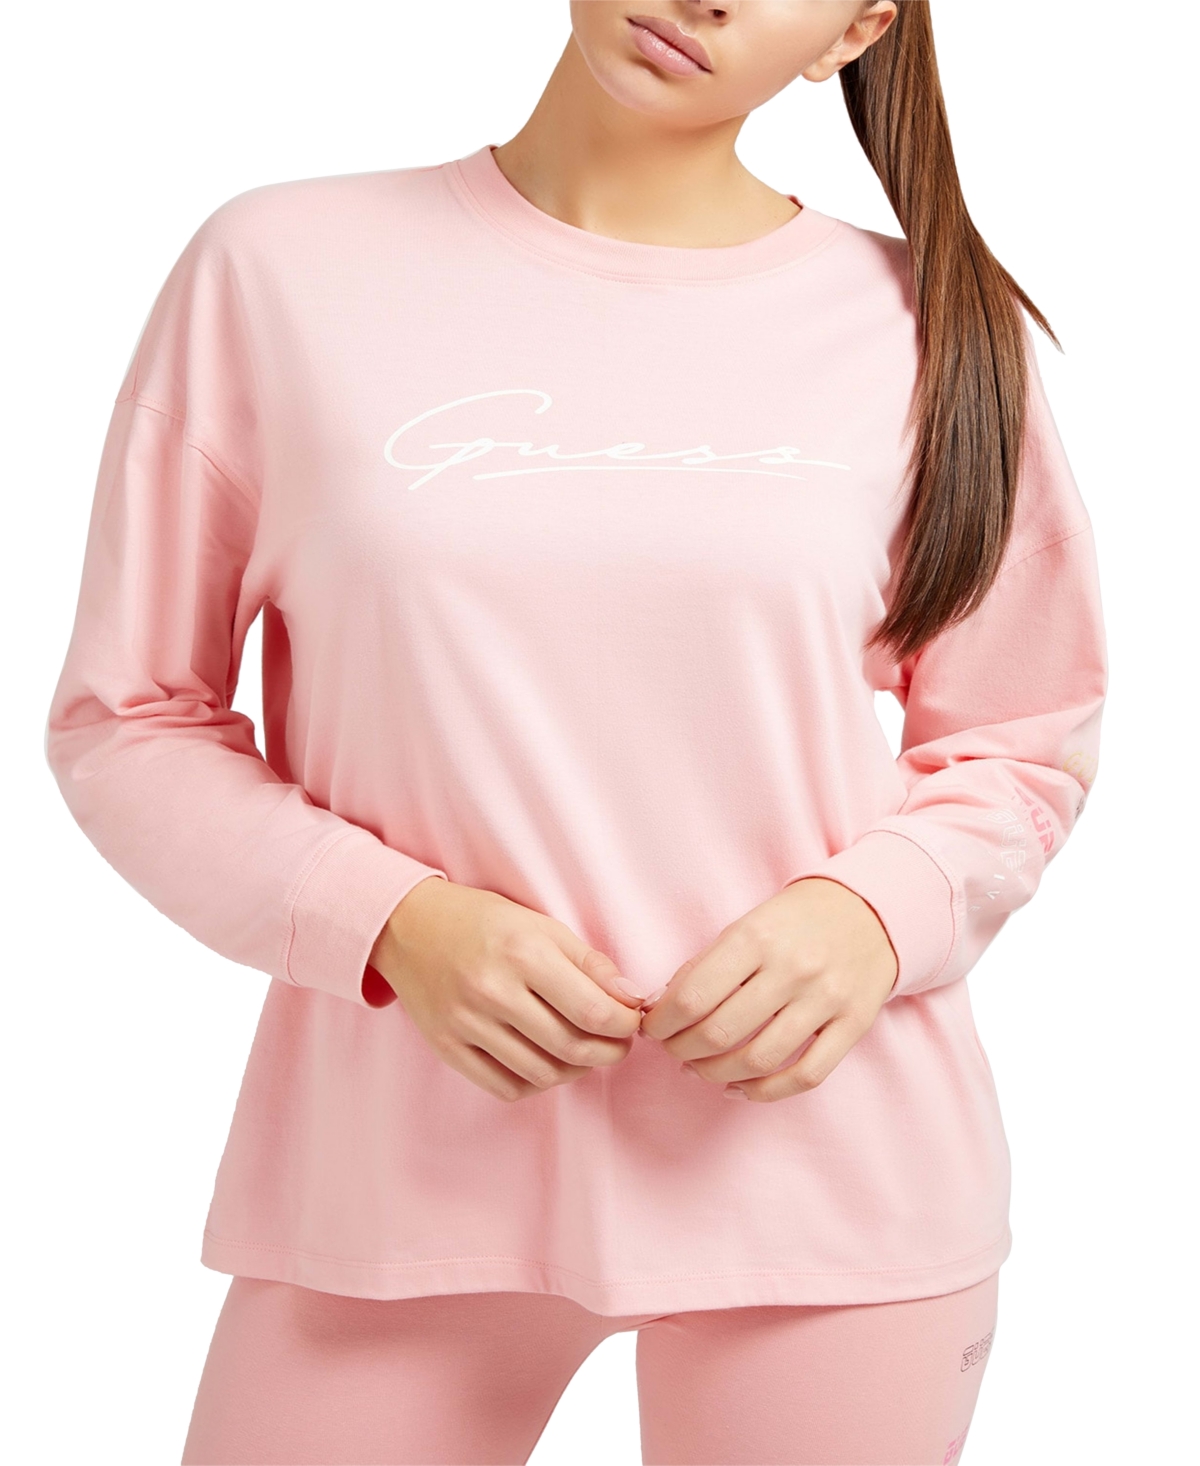 Guess Women's Camille V-Neck Long-Sleeve Top